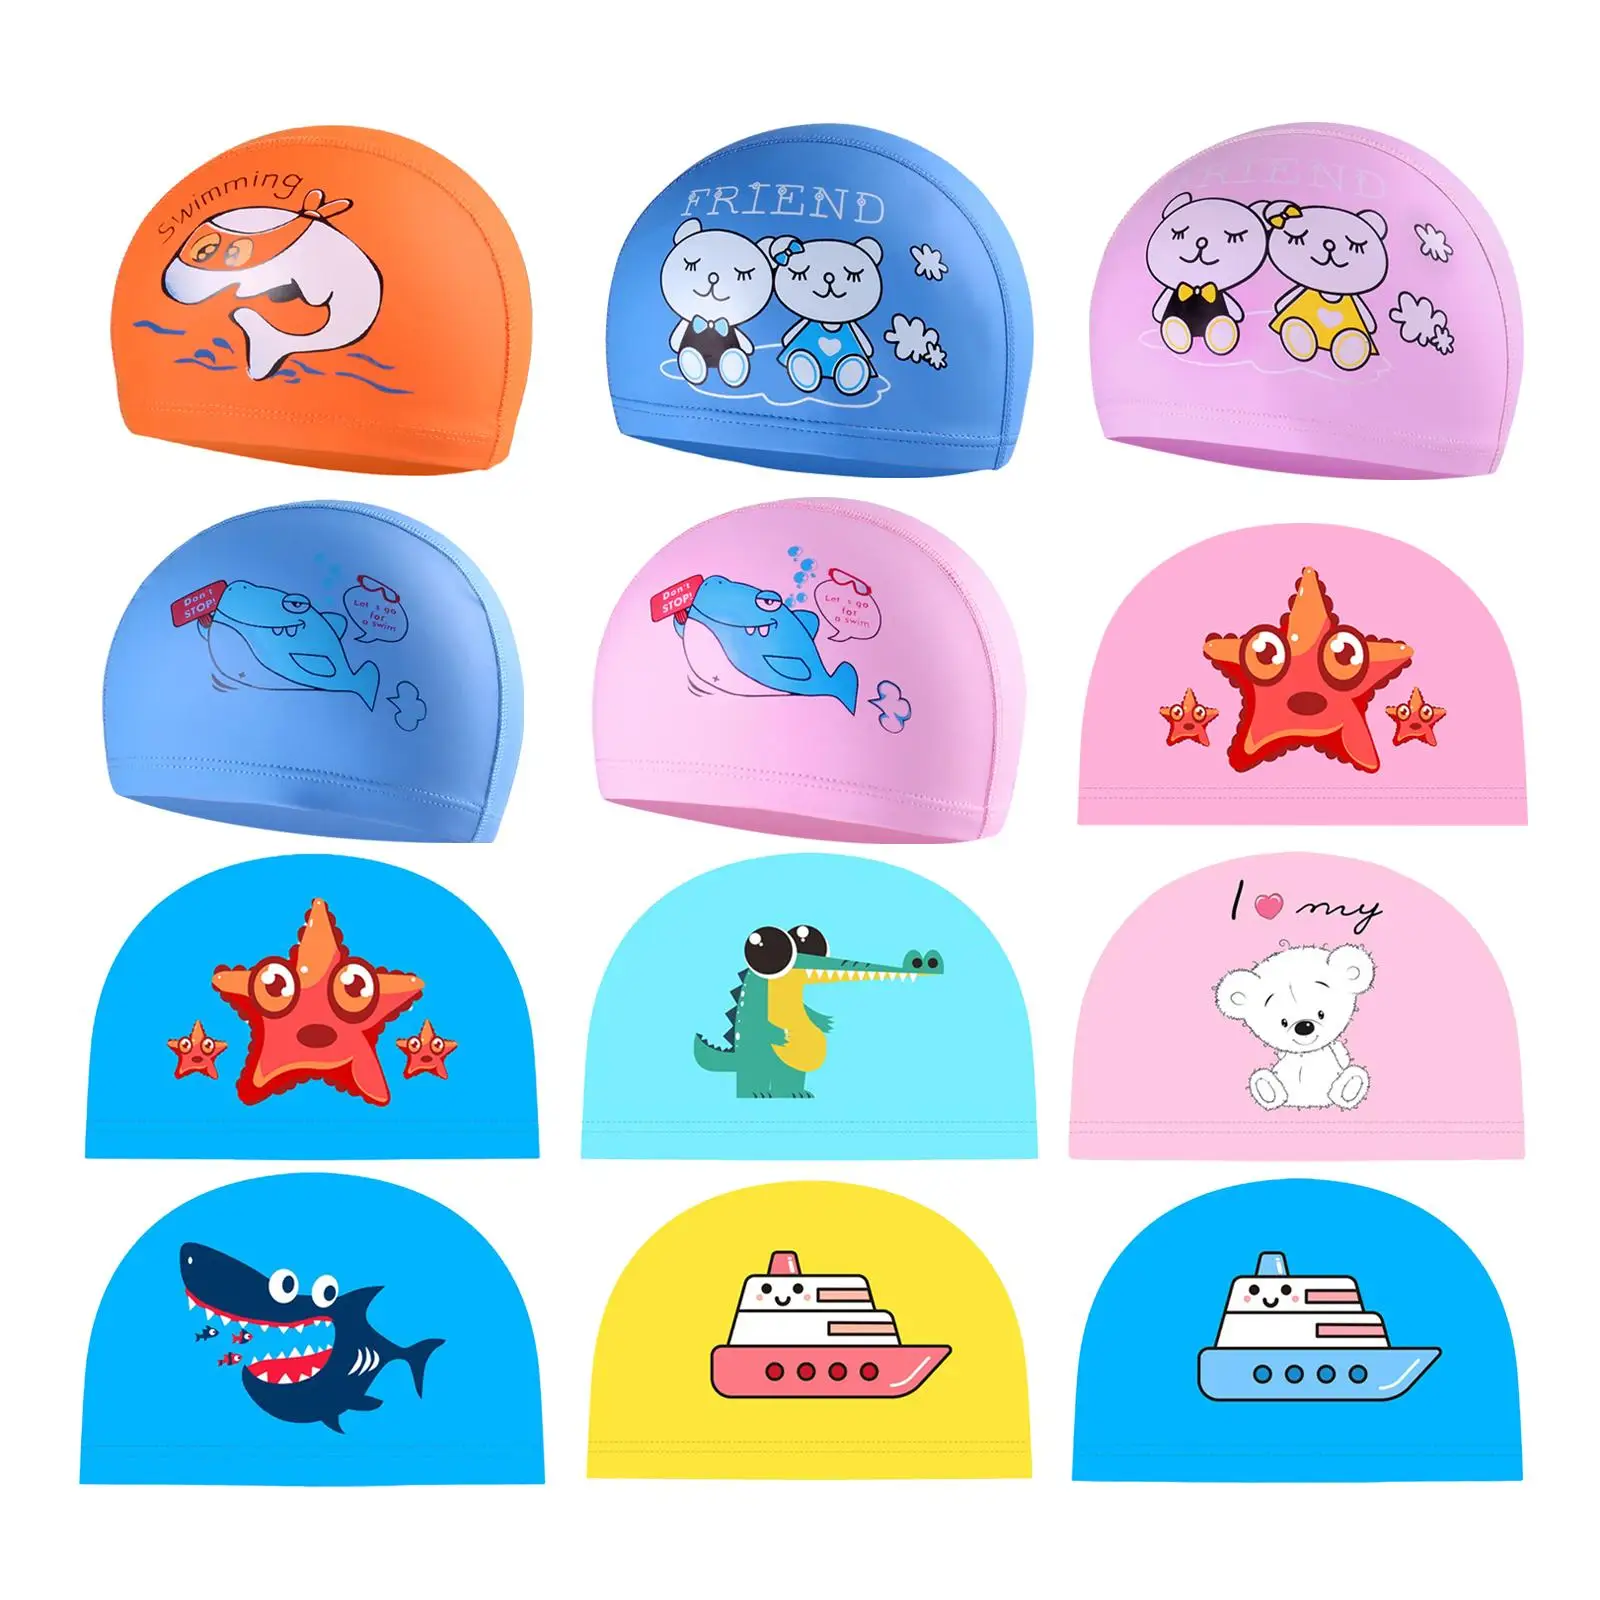 3D PU  for Kids, Swimming Caps  under age 12 Boy Girl with Short to Medium  Cap